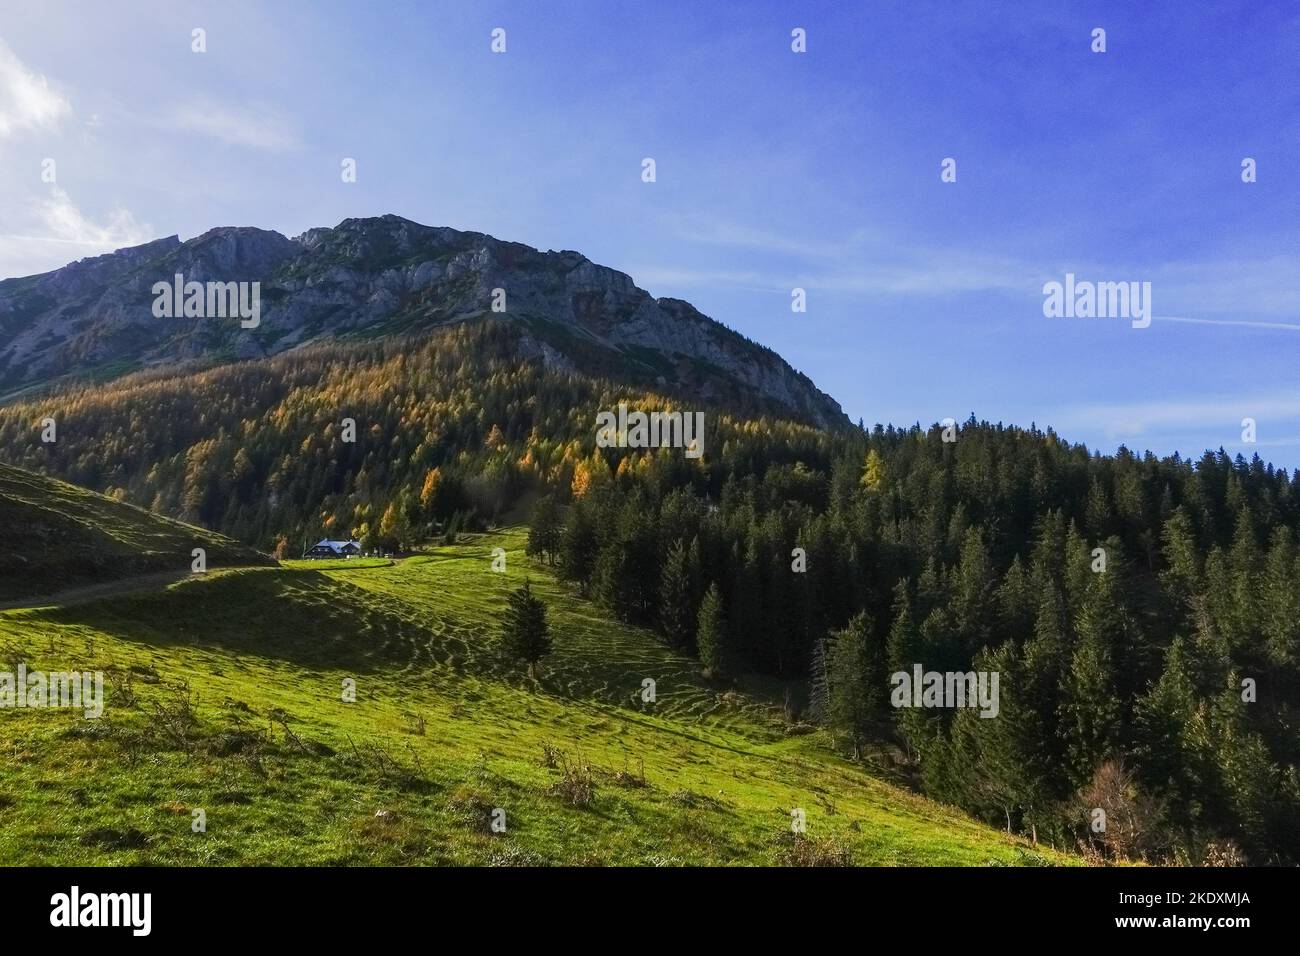 wonderful green meadow with many trees on a high mountain with blue sky Stock Photo